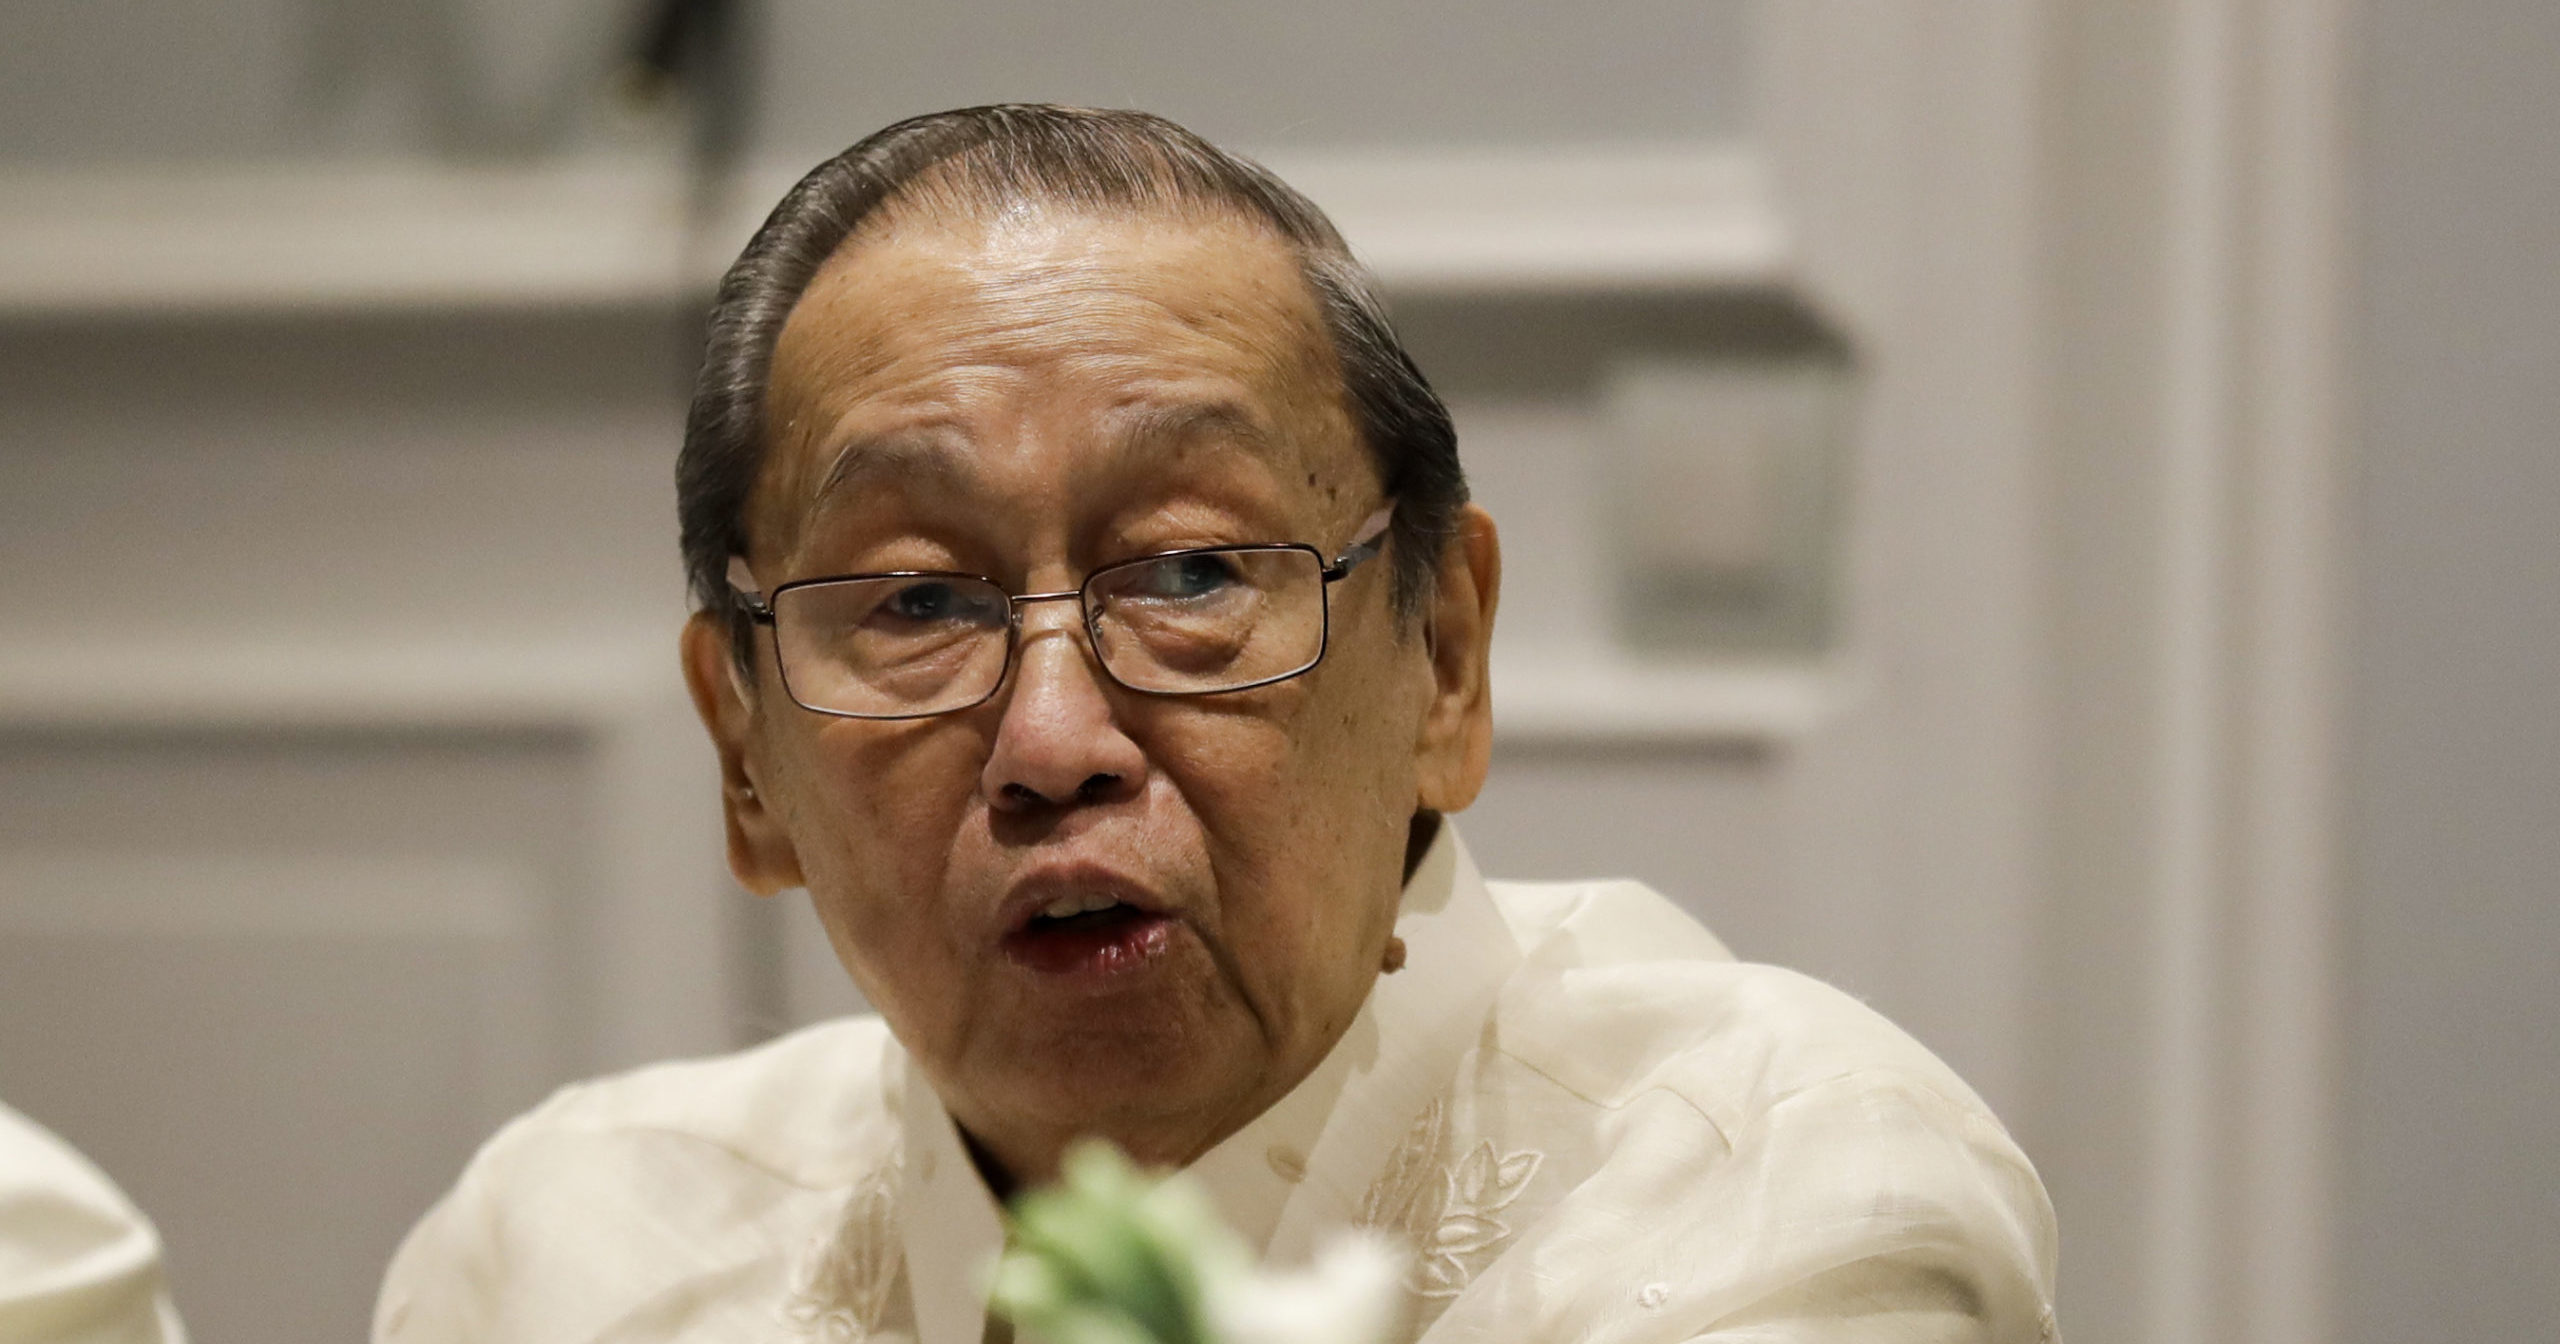 Communist Party of the Philippines leader Jose Maria Sison delivers a speech on January 19, 2017.